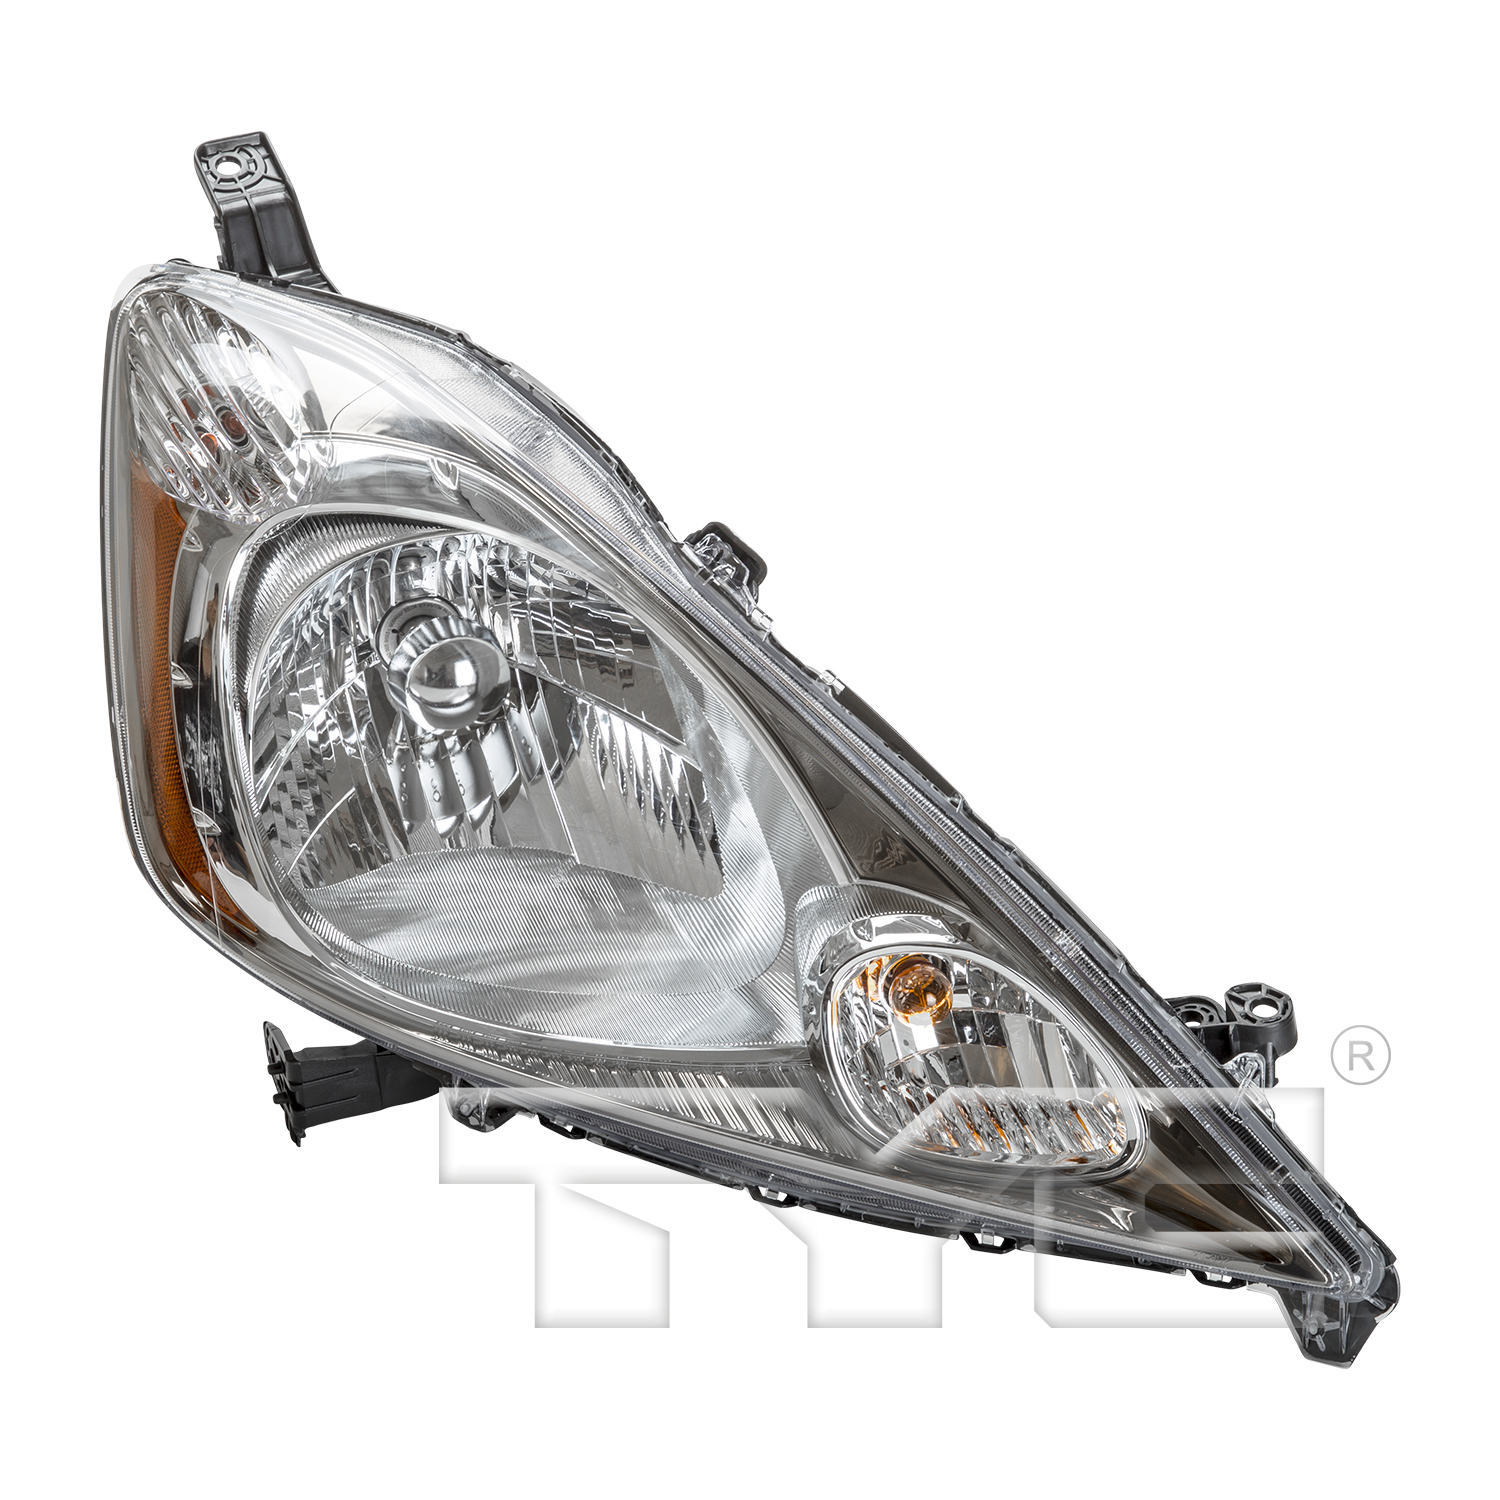 Aftermarket HEADLIGHTS for HONDA - FIT, FIT,09-11,RT Headlamp assy composite